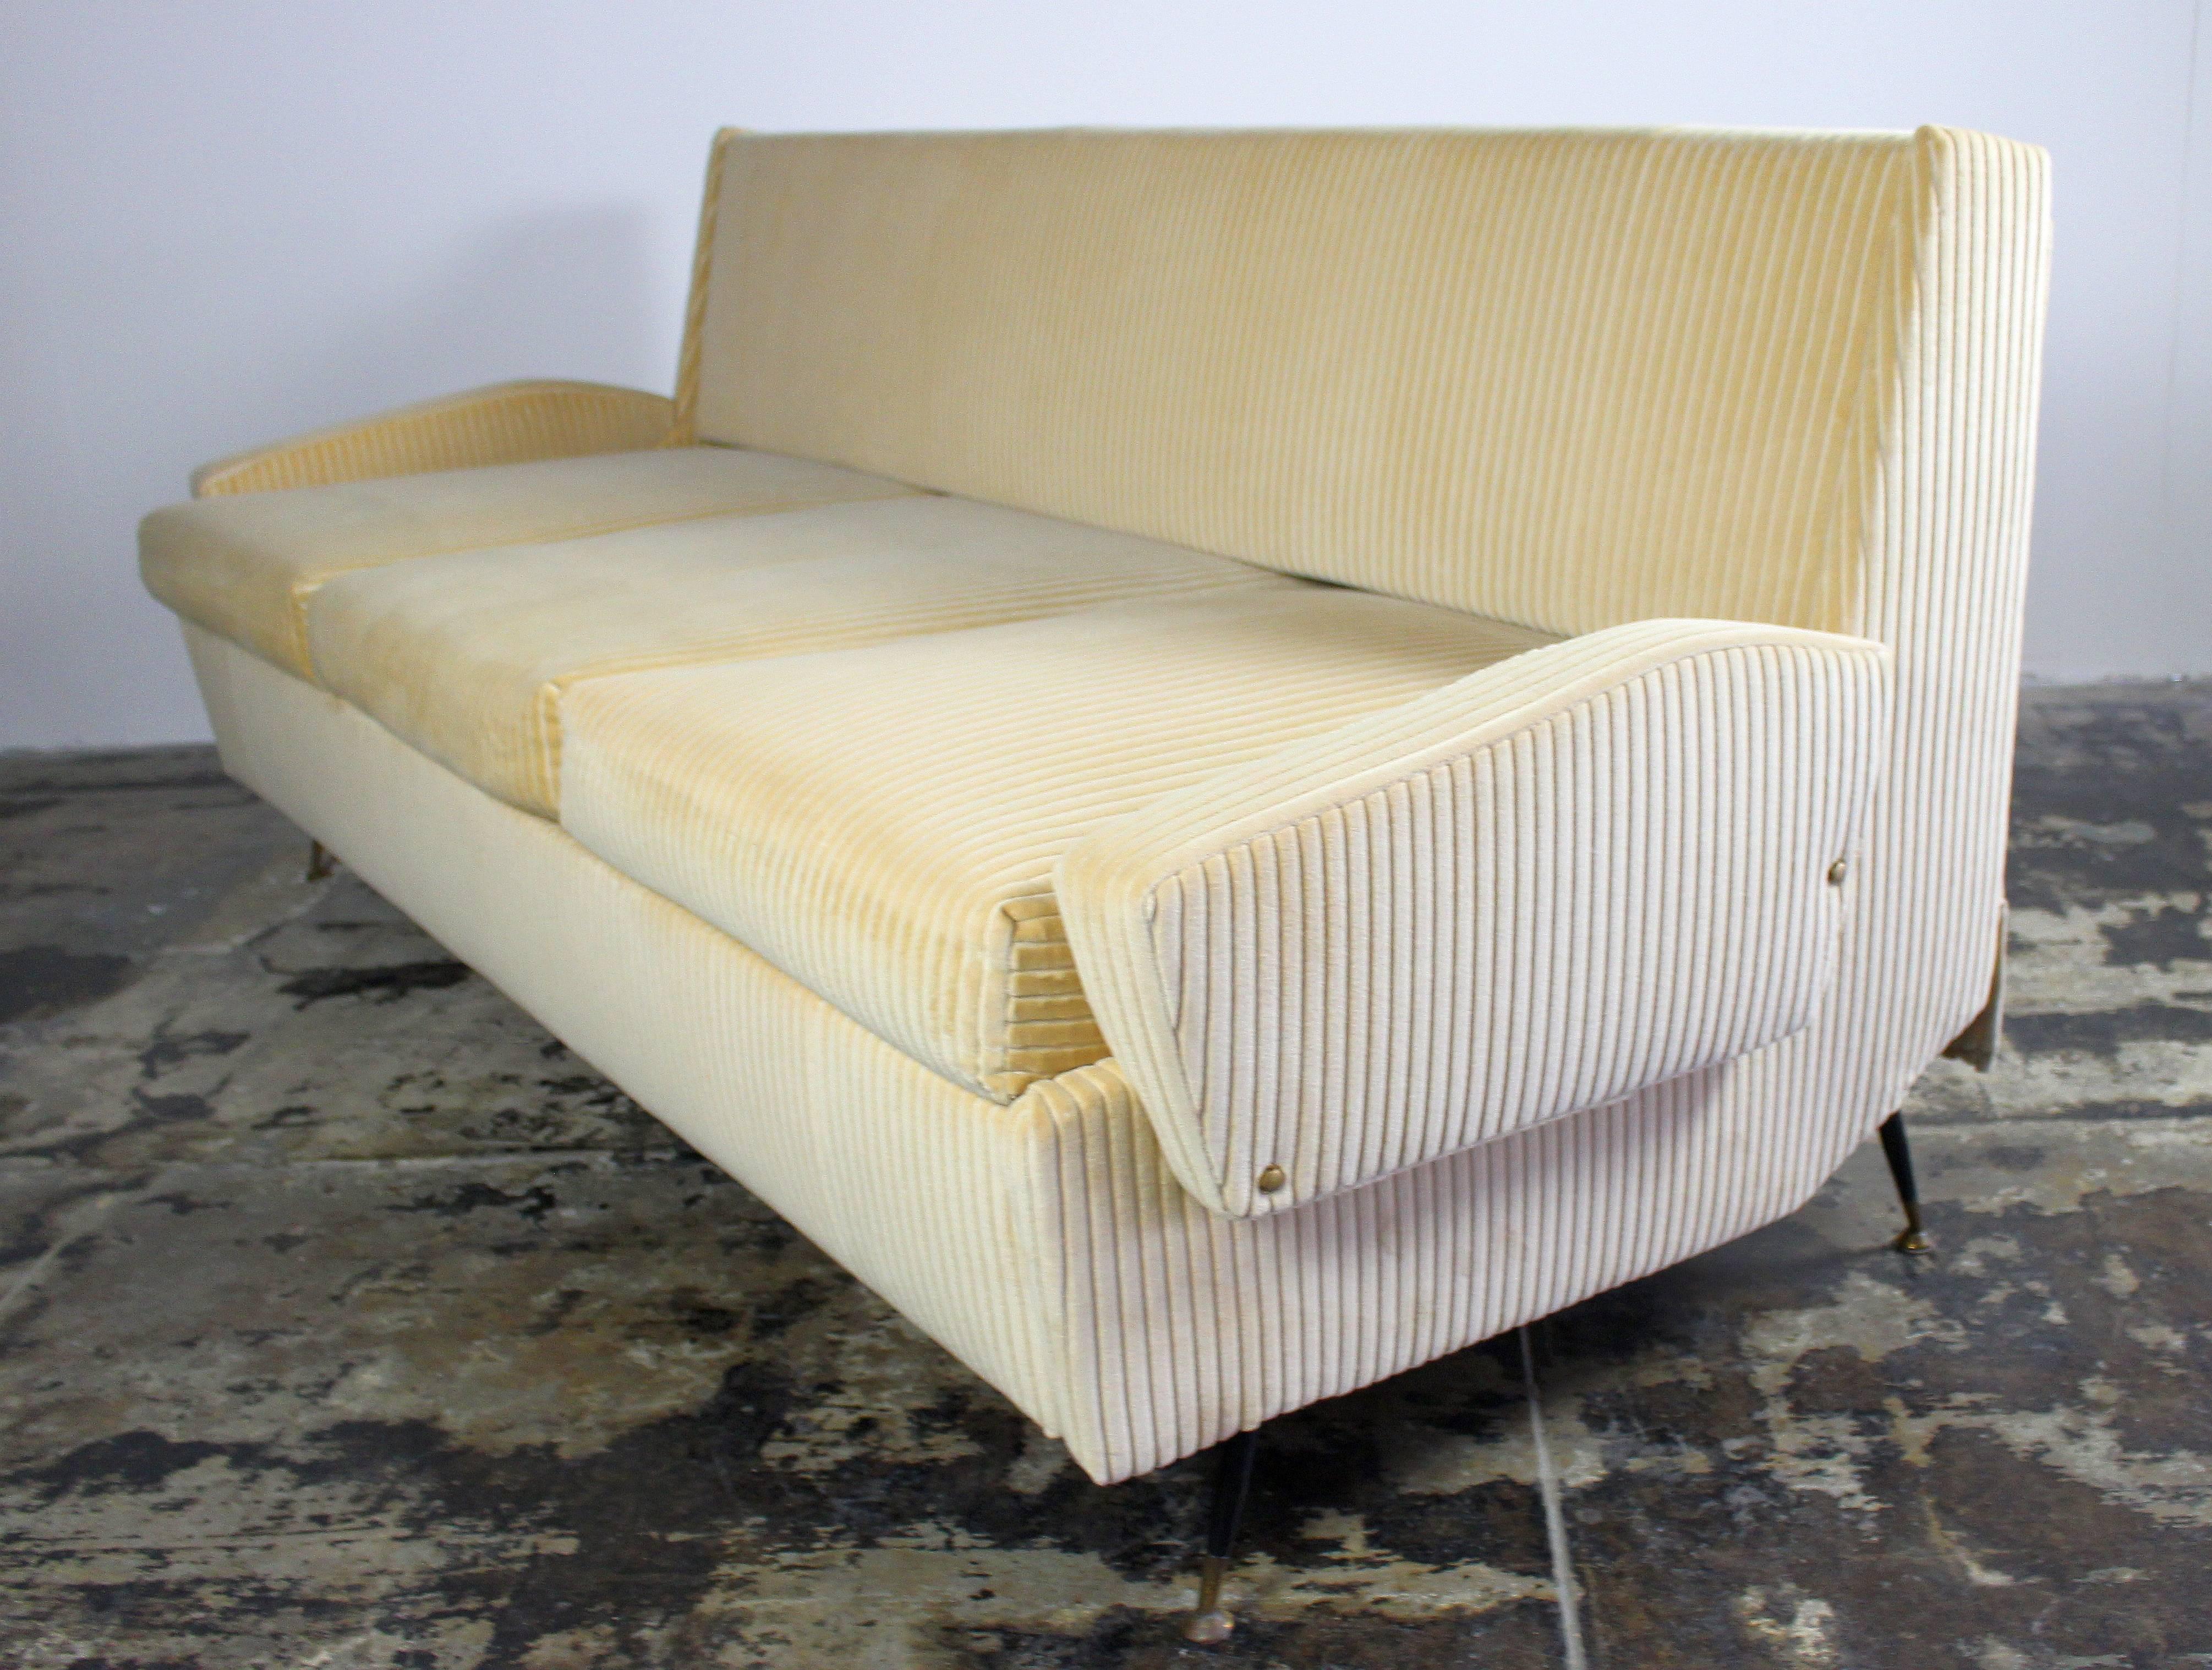 1950s original Italian sofa refurbish and reupholstered with the panna cotta corduroy cotton velvet, and new foam. Sofa and the bed very comfortable .Brass and metal lags
when the bed extended length is 80 inches and depth 31.5 inches.